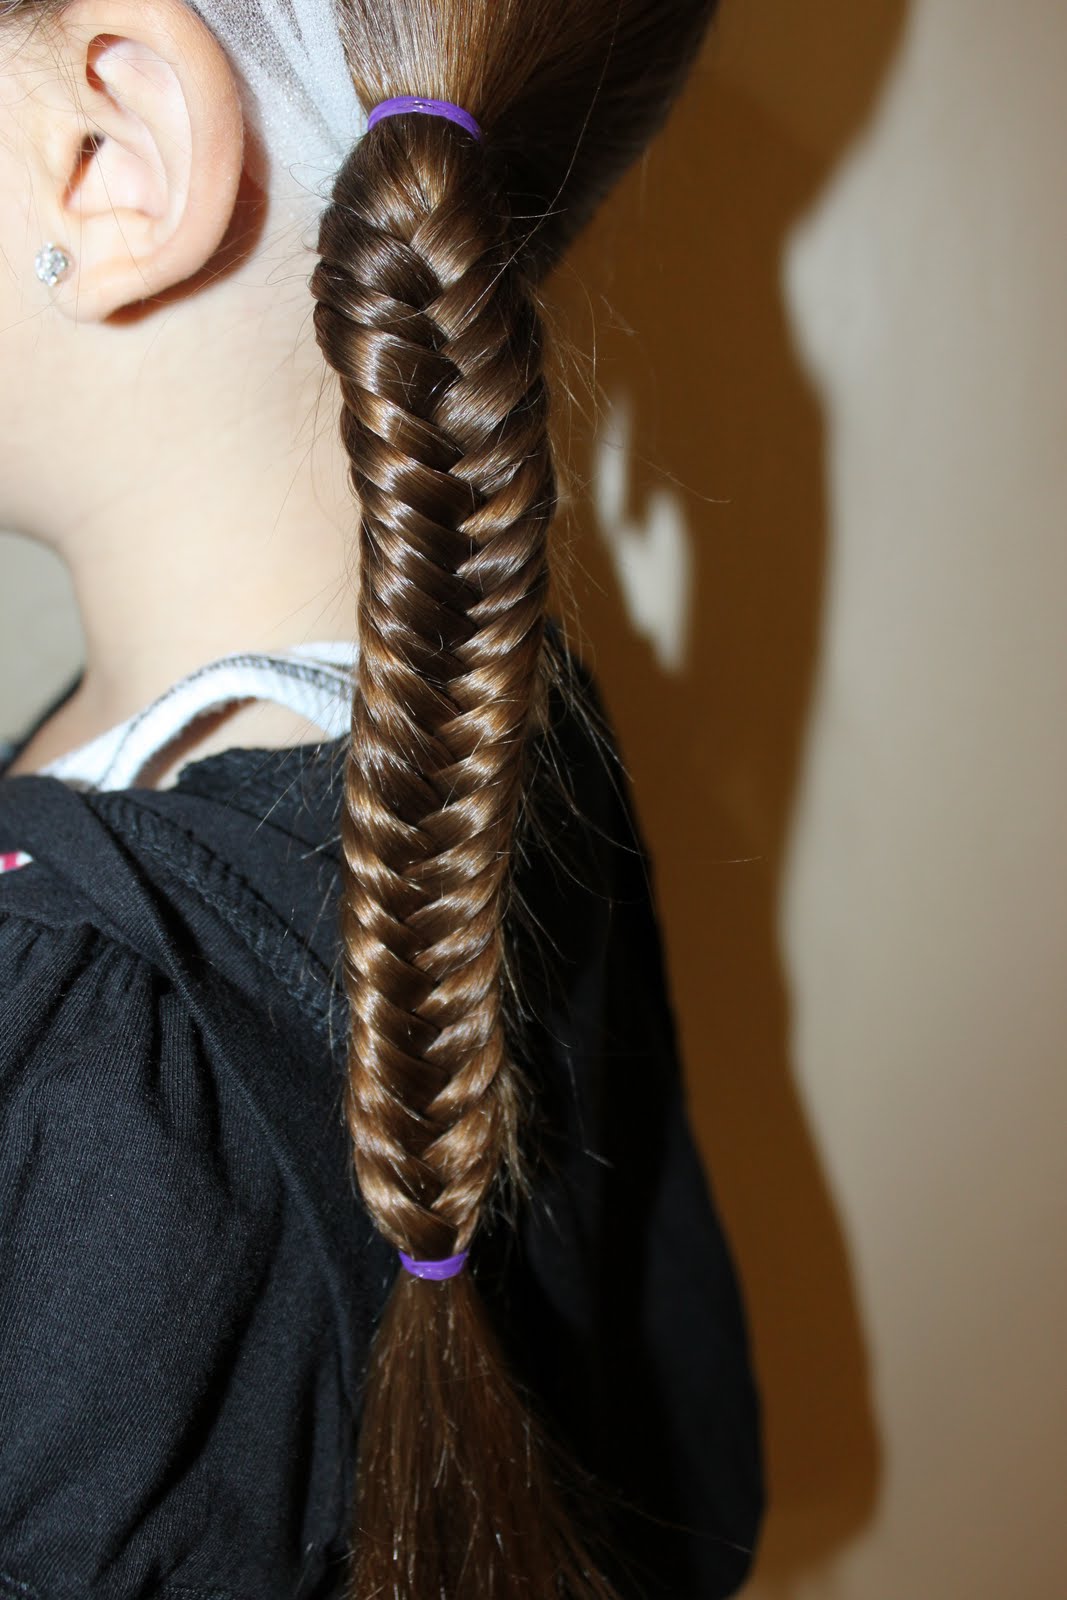 Hairstyles for Girls.. The Wright Hair: FishTail Braids